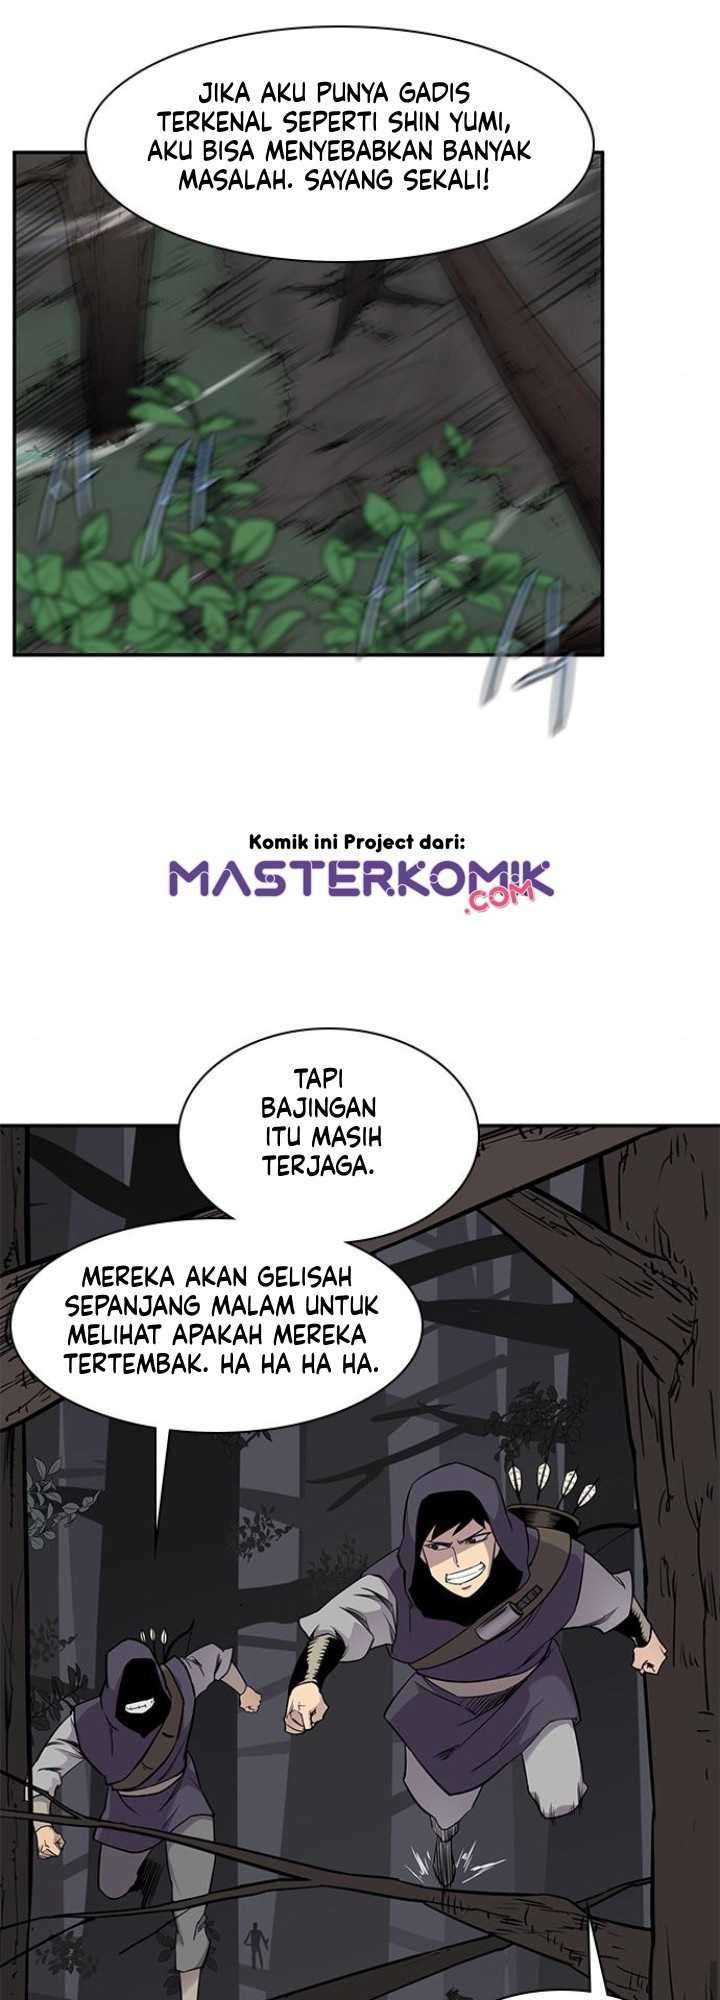 The Strongest Ever Chapter 24